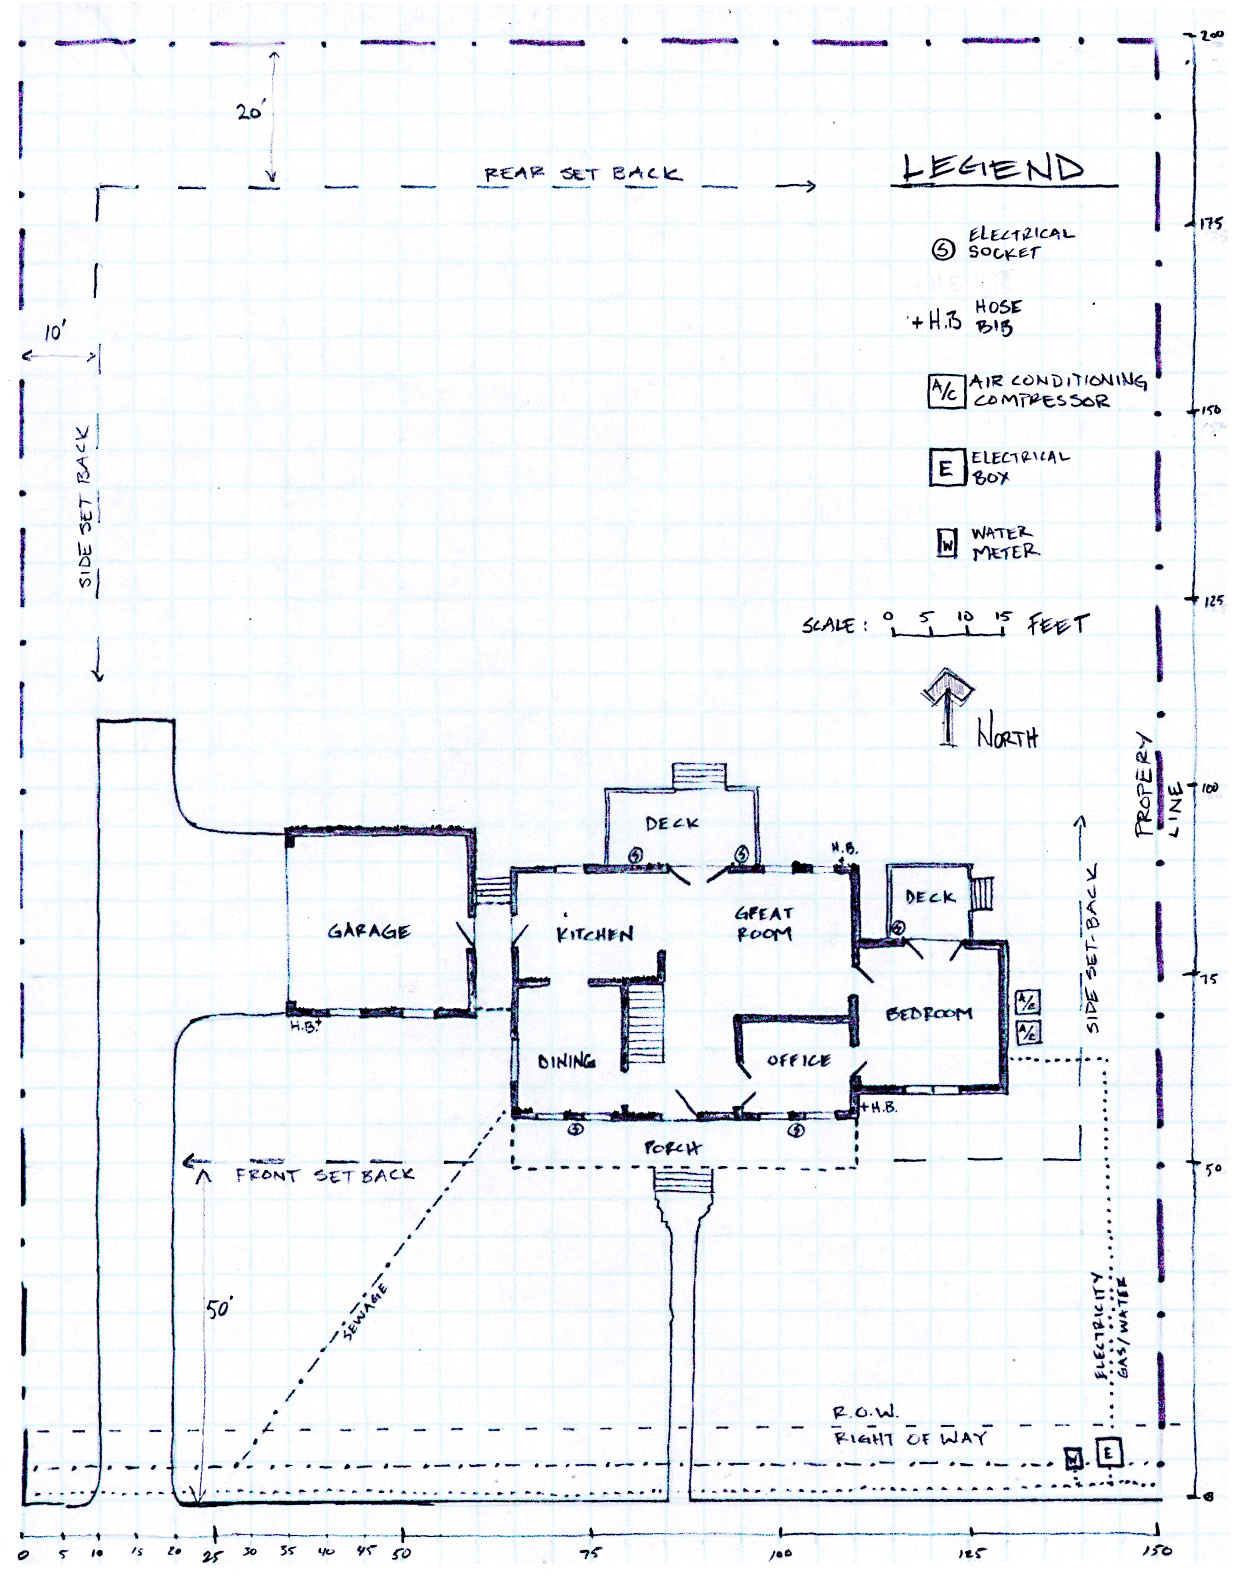 Example base plan drawing of a house and yard.